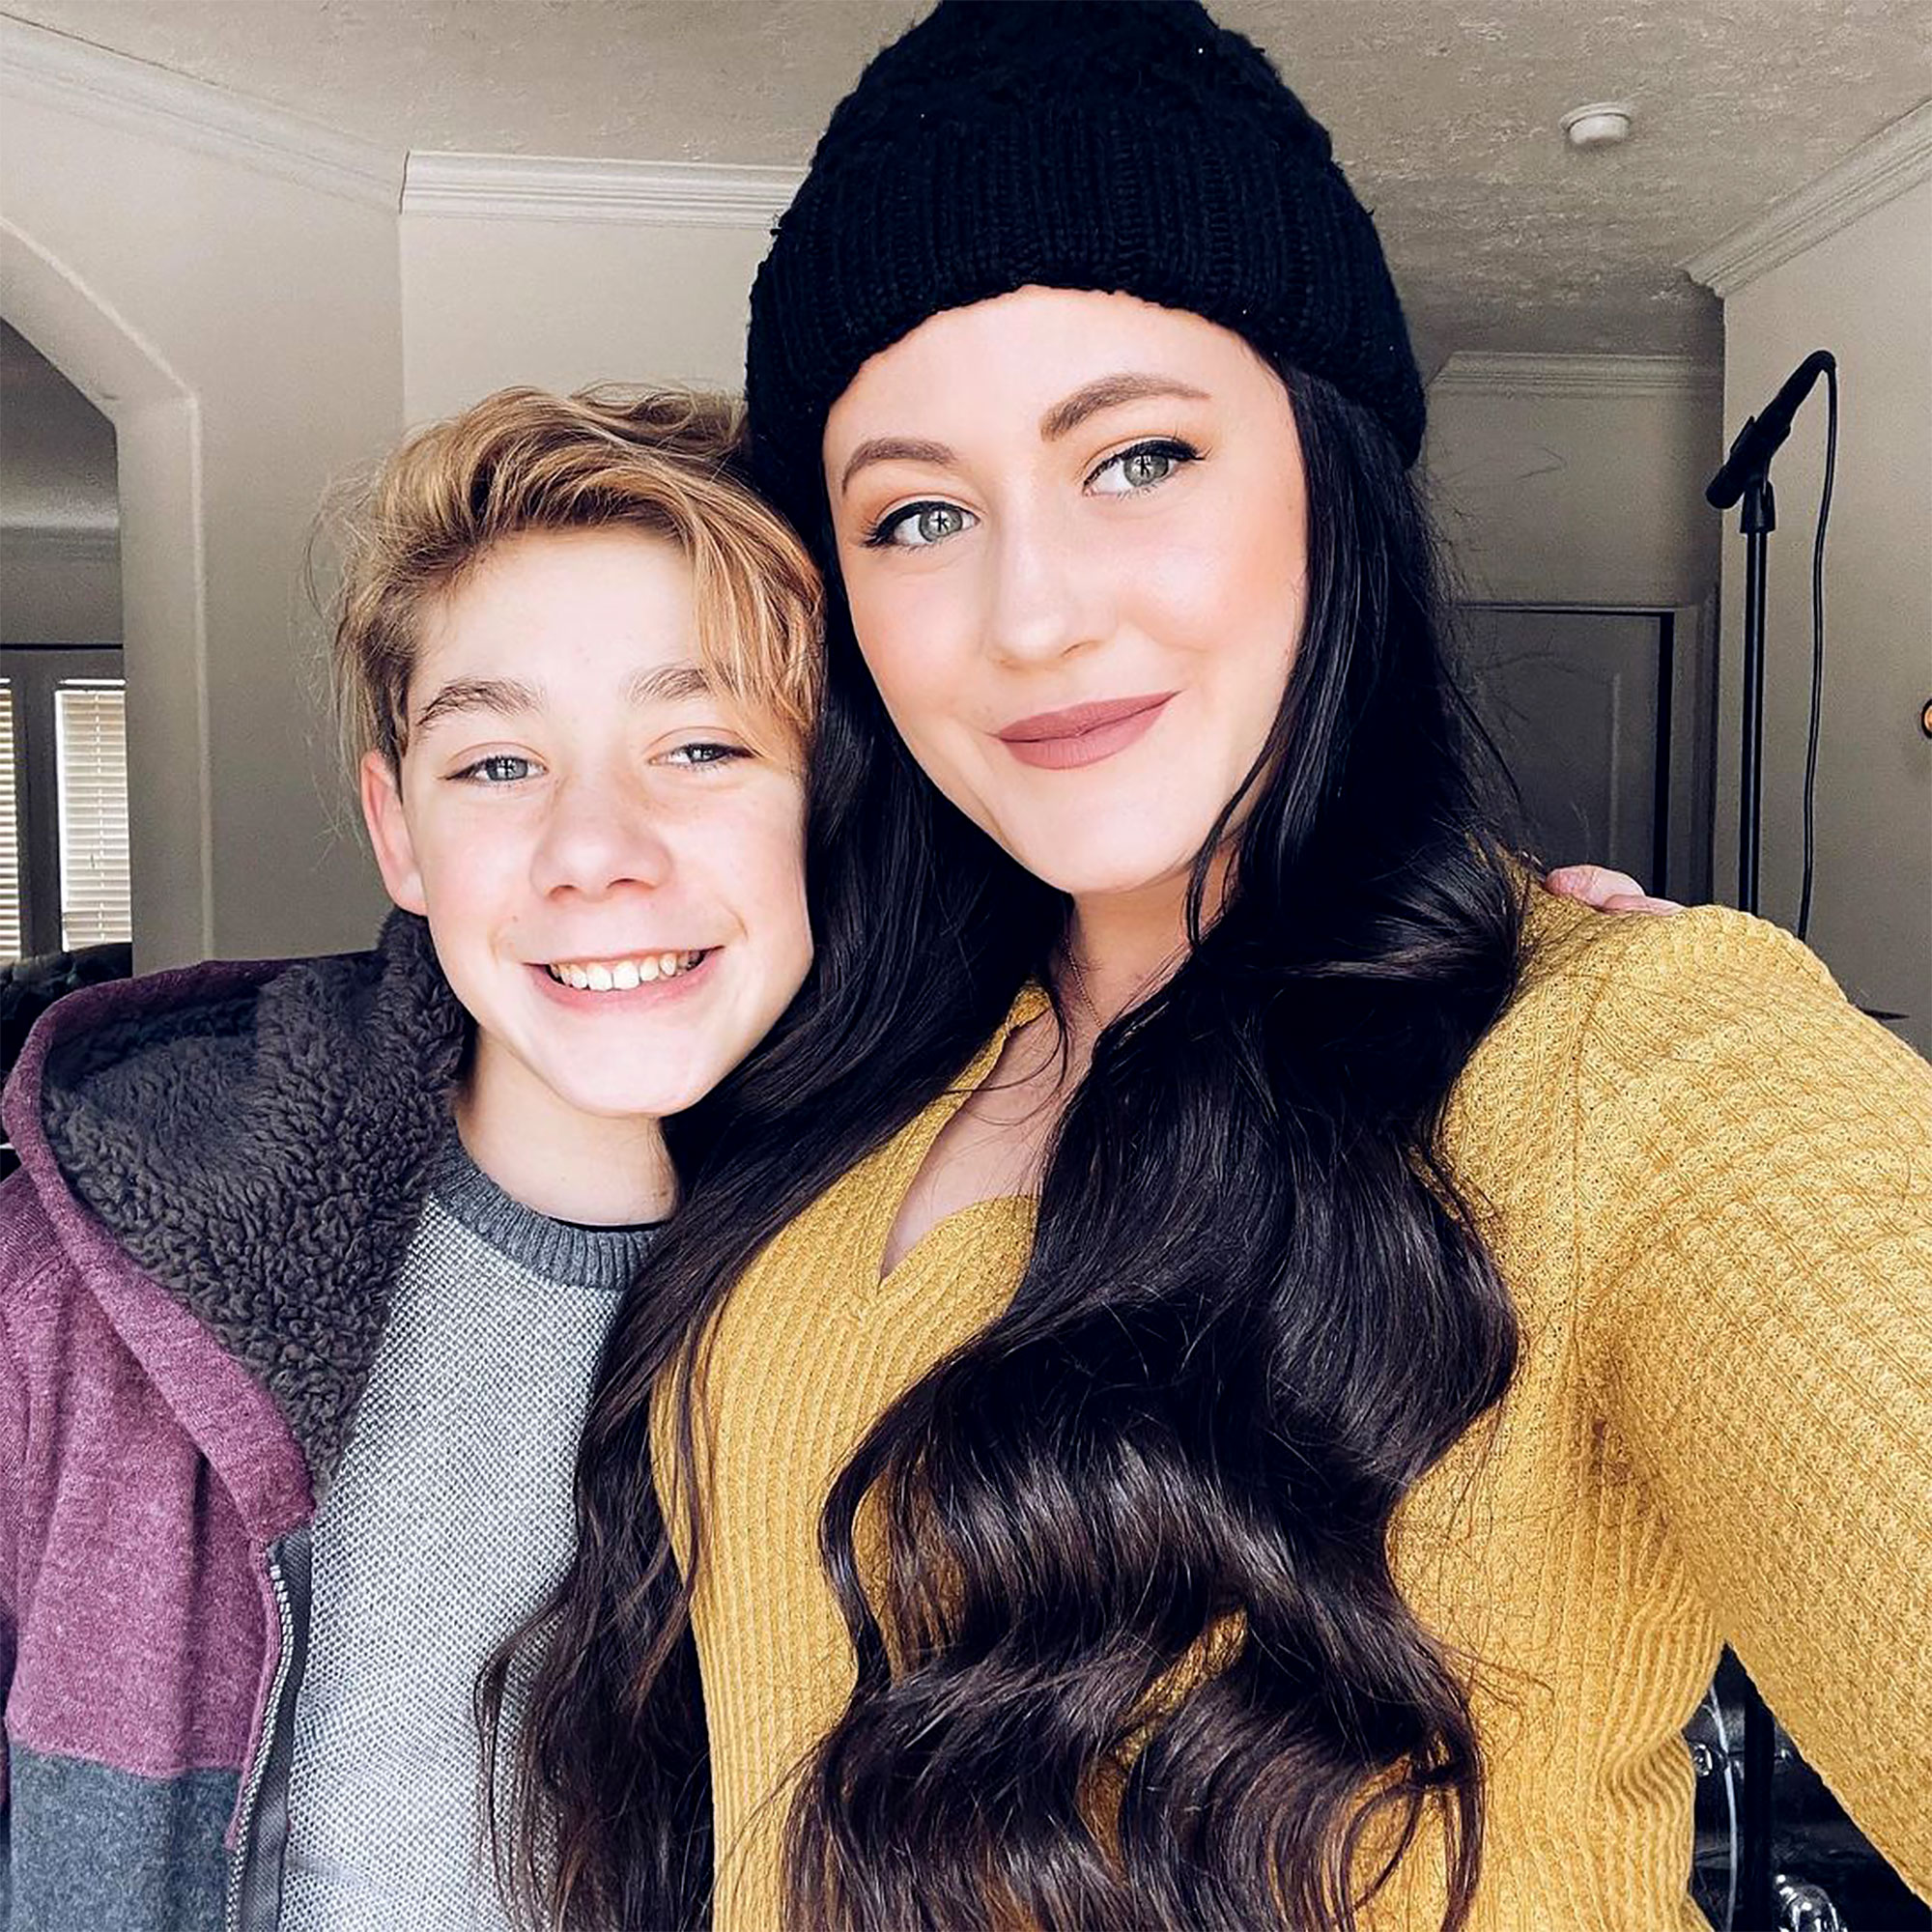 Teen Mom 2s Jenelle Evans Son Jace, 12, Looks Grown Up New Photos photo pic picture